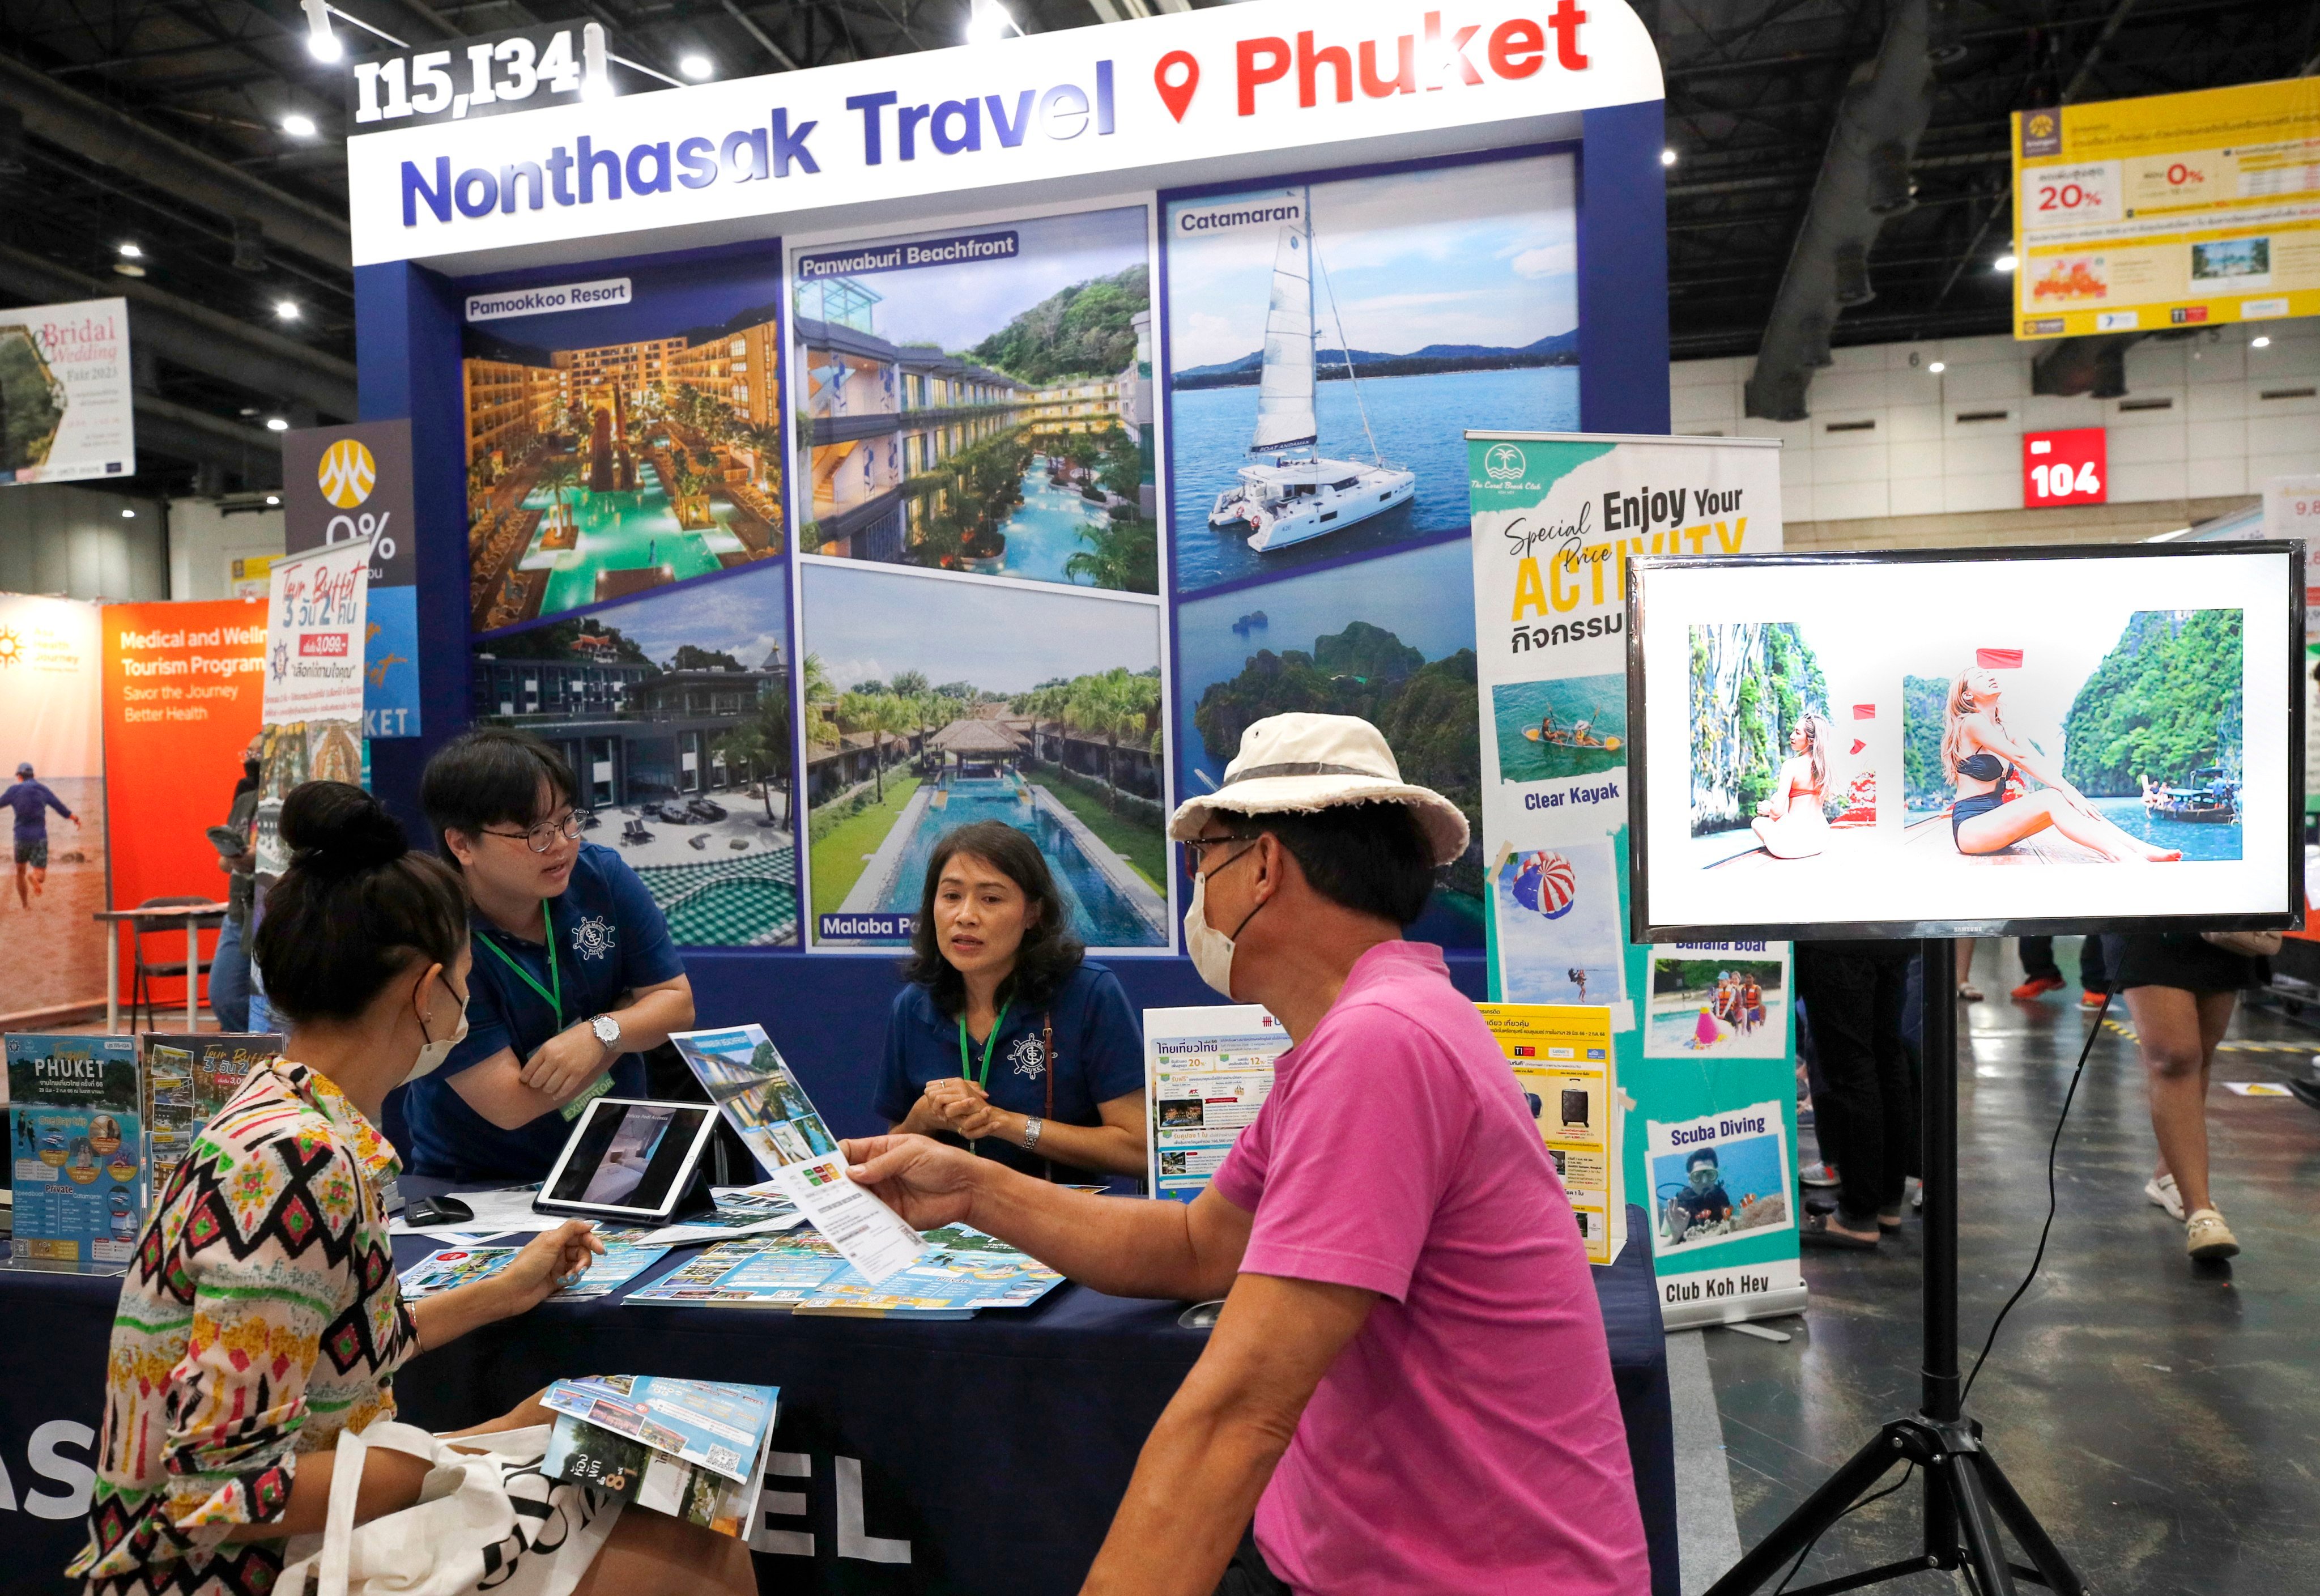 Visitors check travel deals at a travel and tourism fair in Bangkok on June 29. The tourism and travel fair featured hundreds of exhibitors from tour operators, hotels and travel agencies offering discounts in an attempt to revive the country’s tourism industry and boost its economy. Photo: EPA-EFE